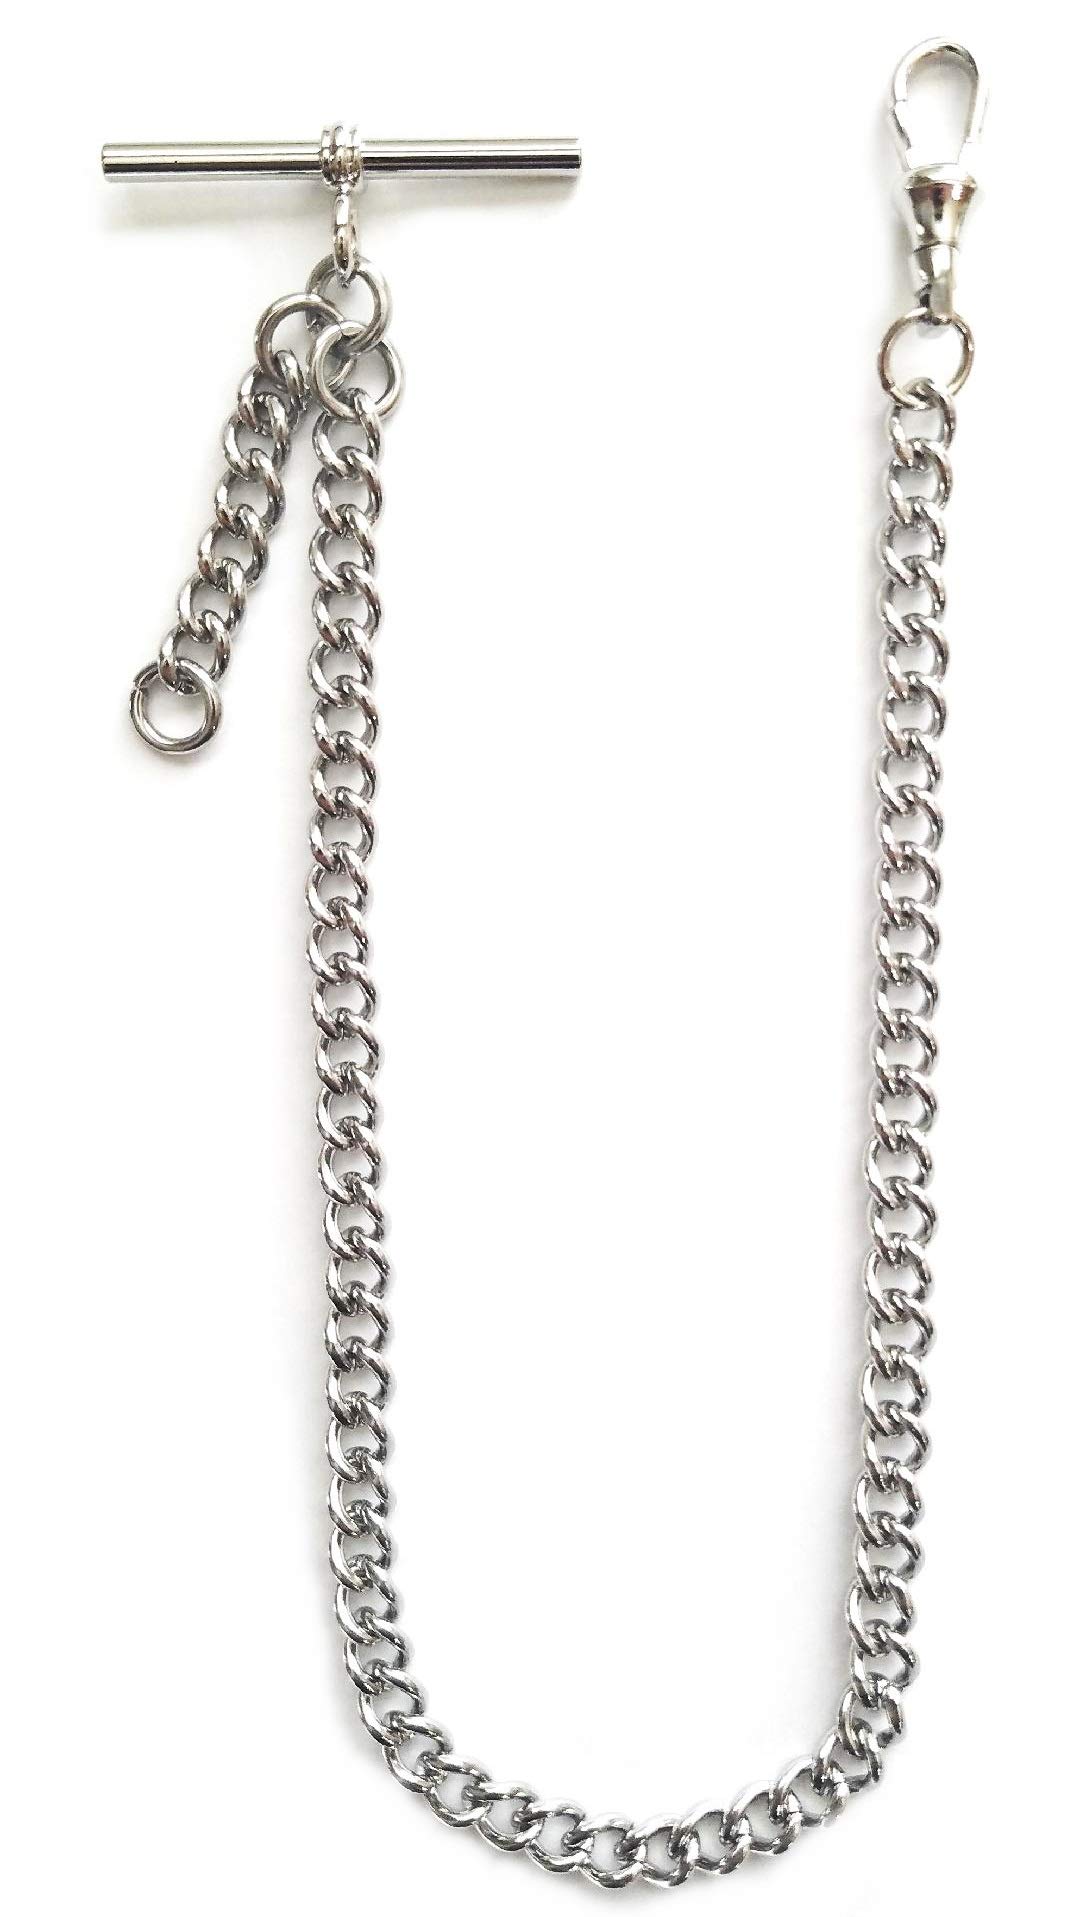 Dueber Silver Tone Chrome Plated Albert Pocket Watch Chain with fob Drop